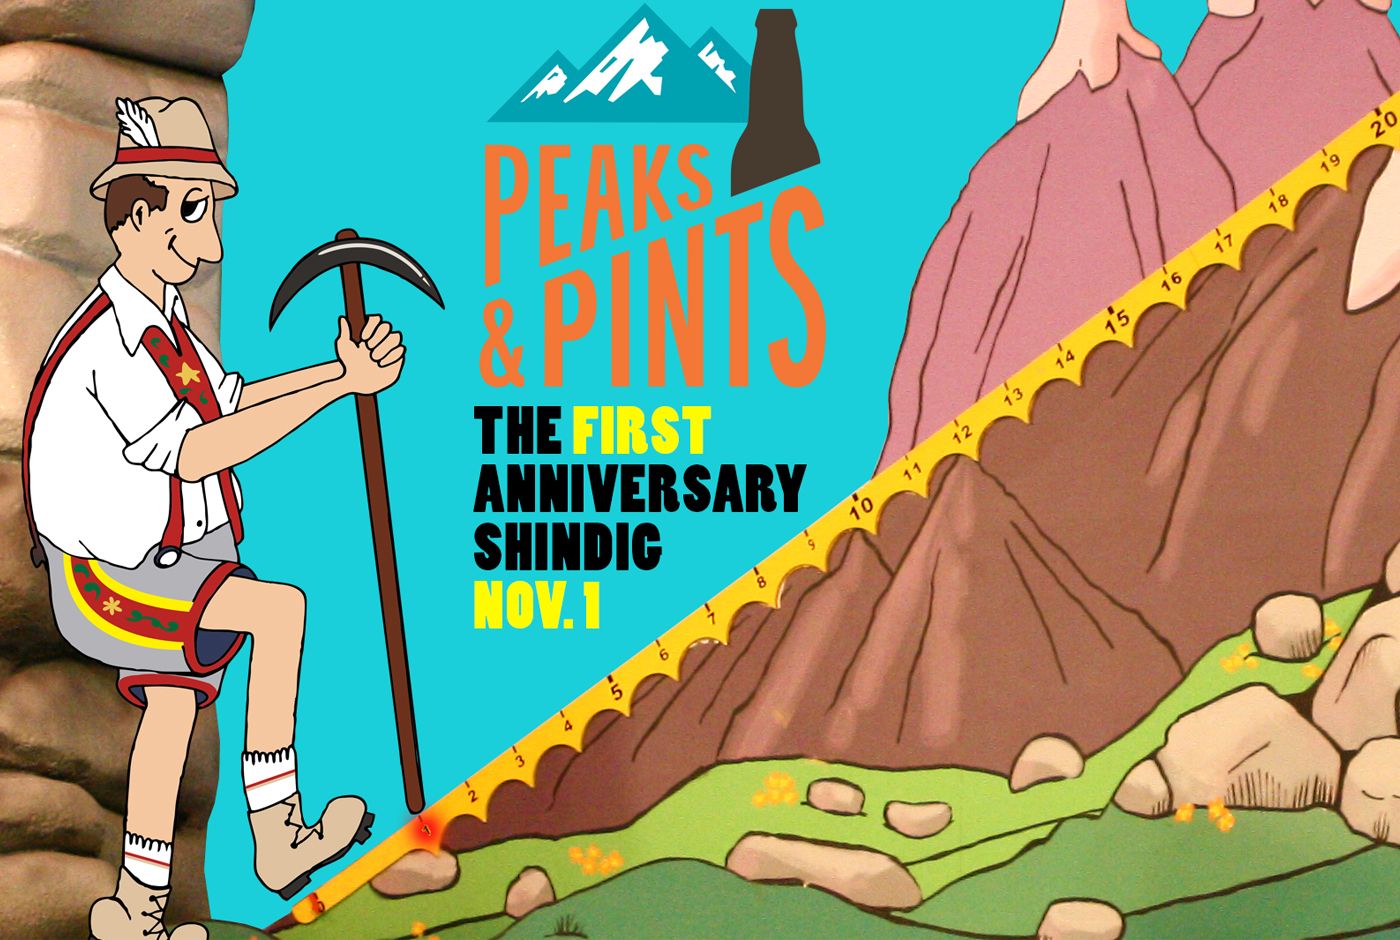 Peaks-And-Pints-First-Anniversary-Shindig-calendar